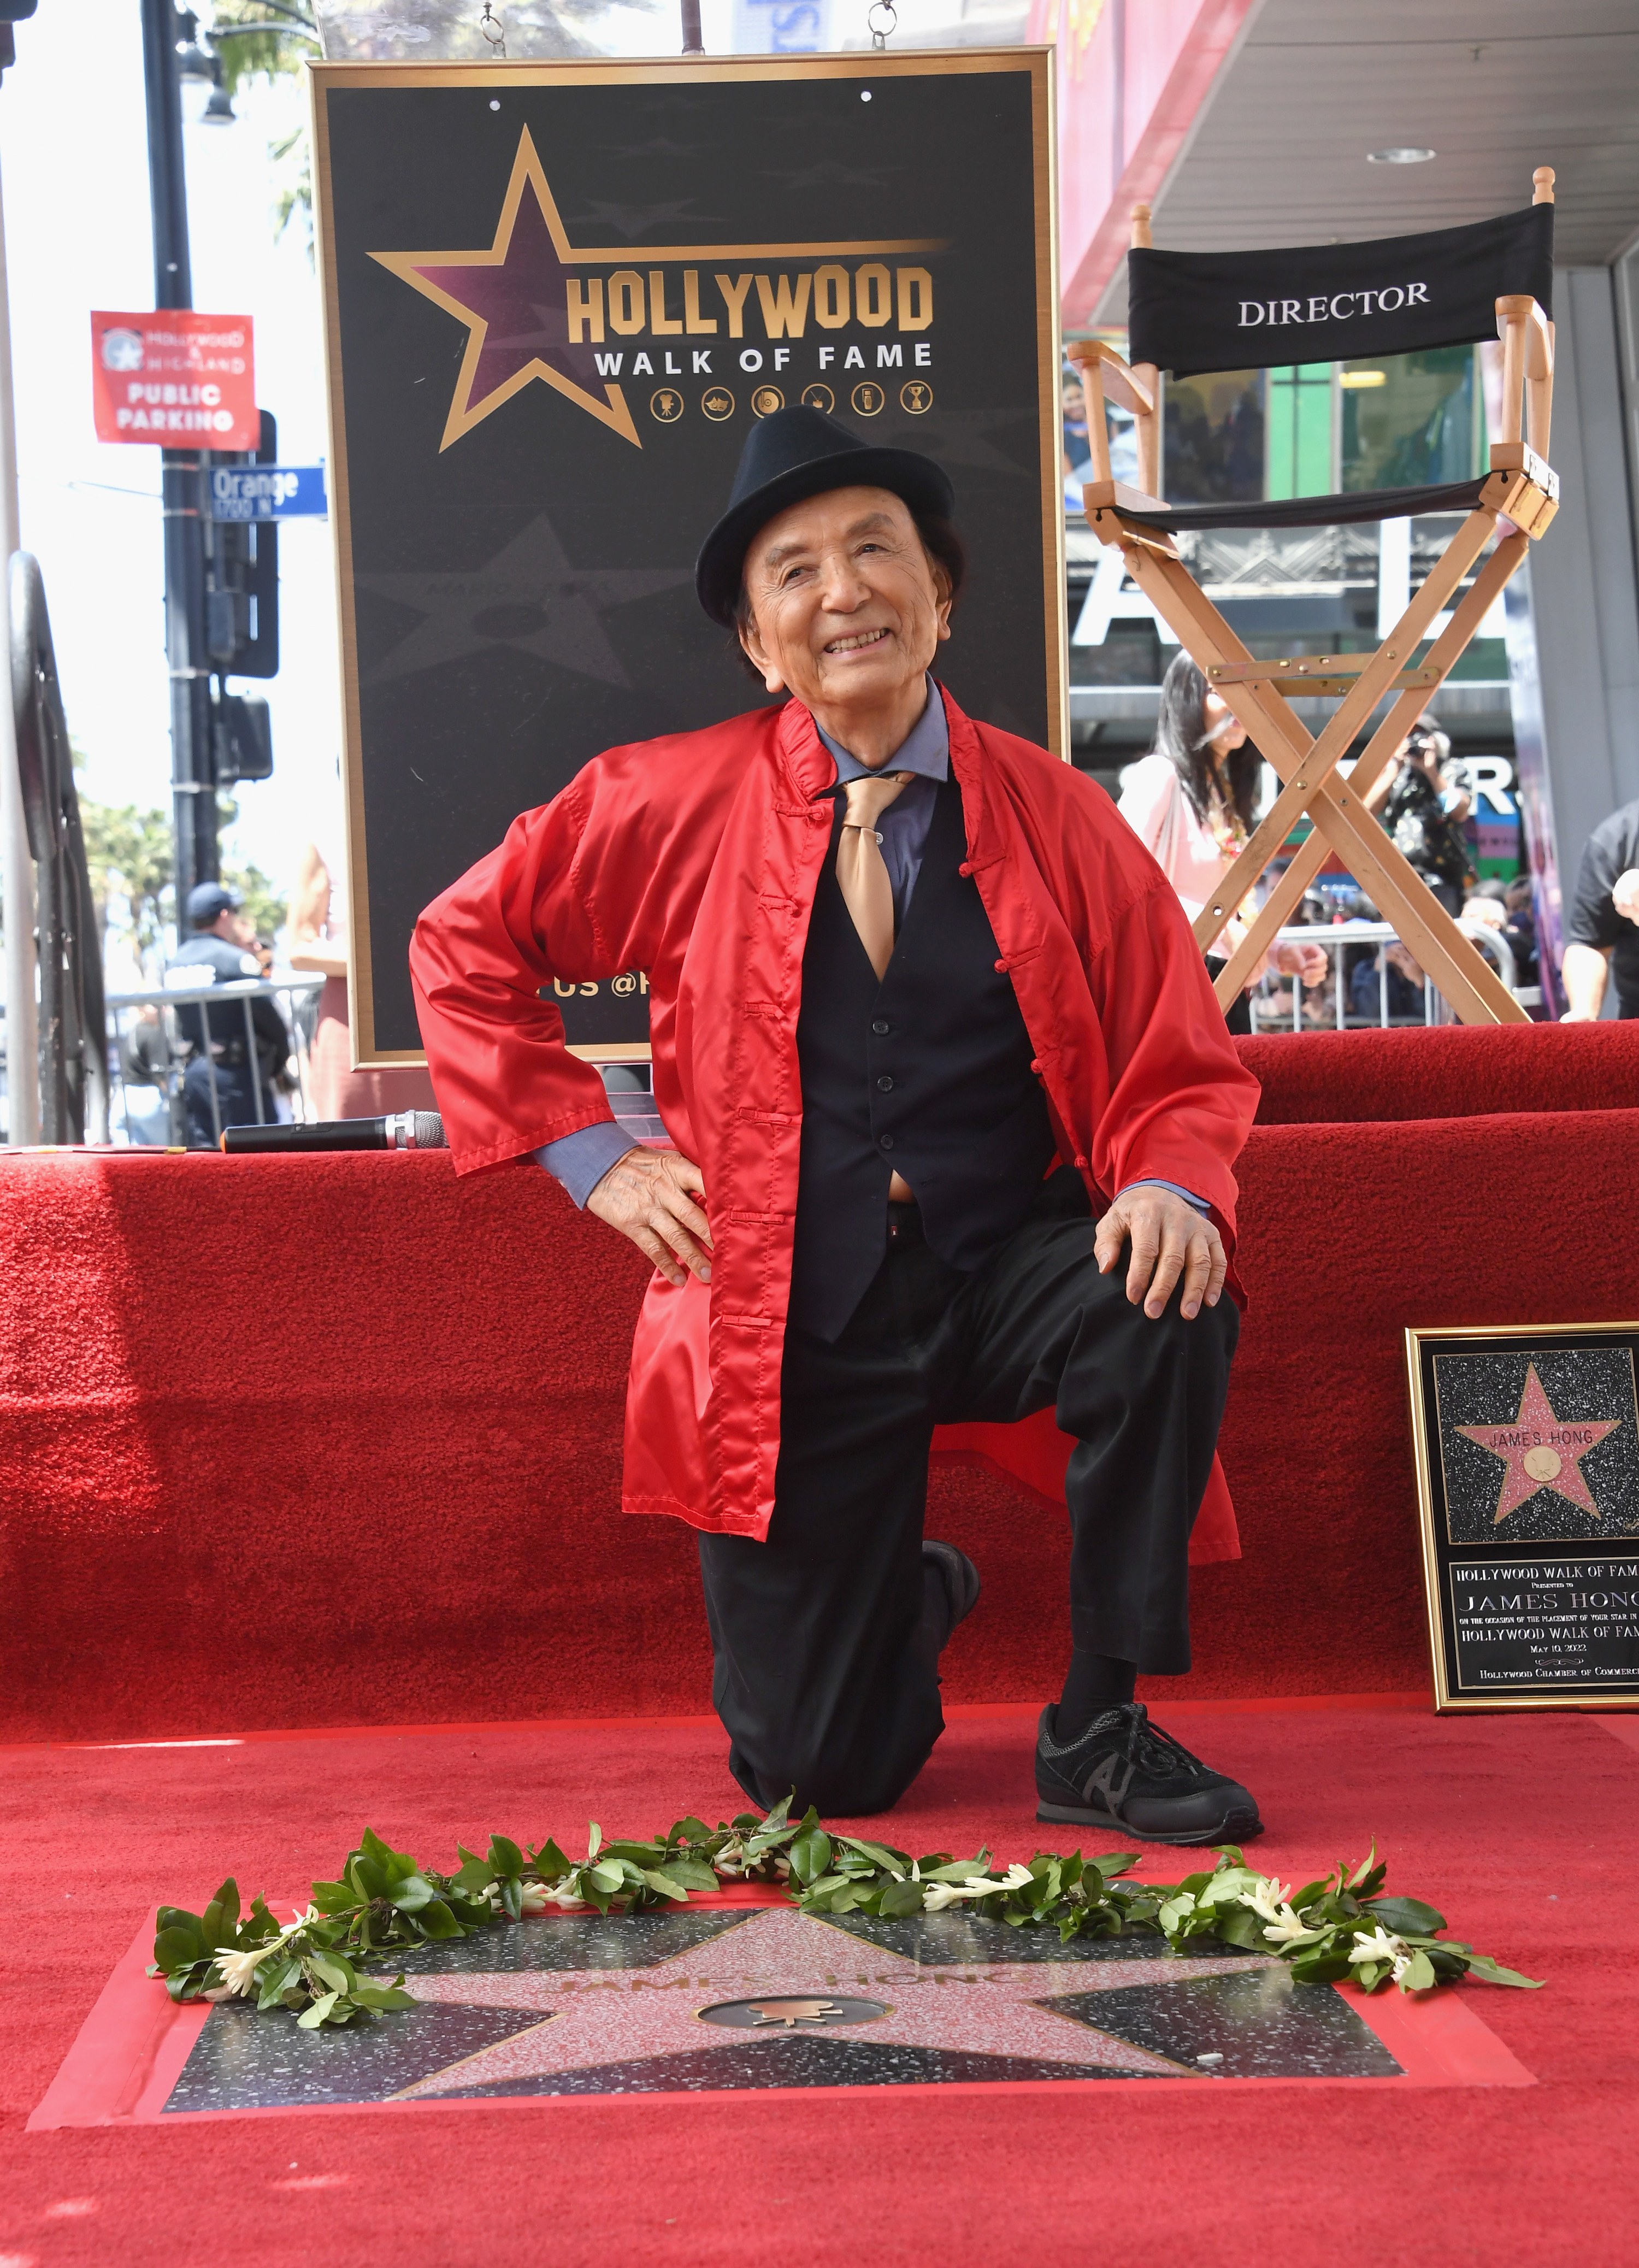 James kneeling down next to his Hollywood star